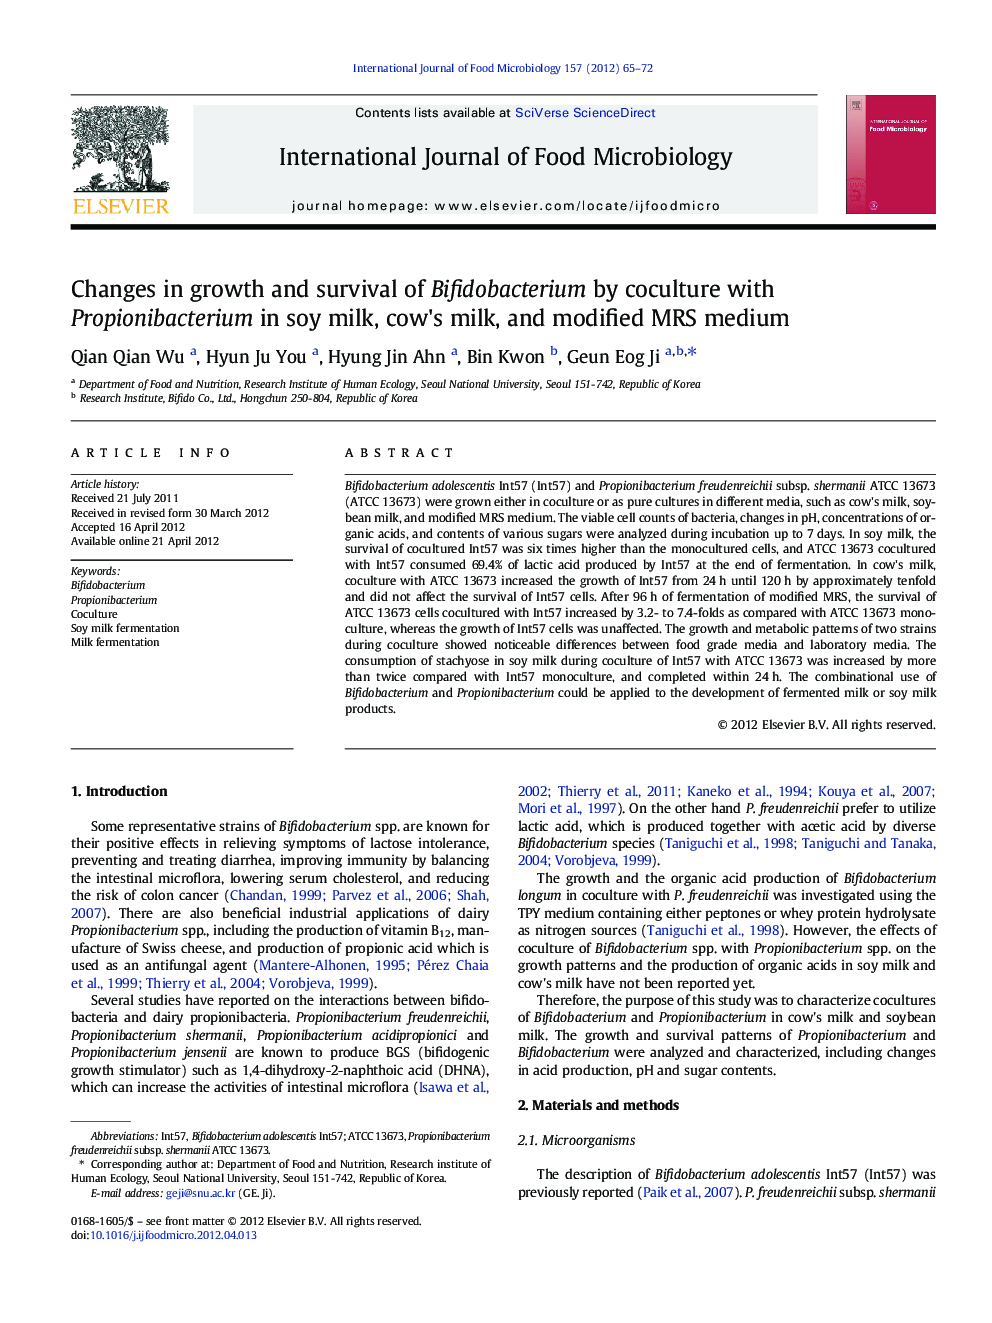 Changes in growth and survival of Bifidobacterium by coculture with Propionibacterium in soy milk, cow's milk, and modified MRS medium